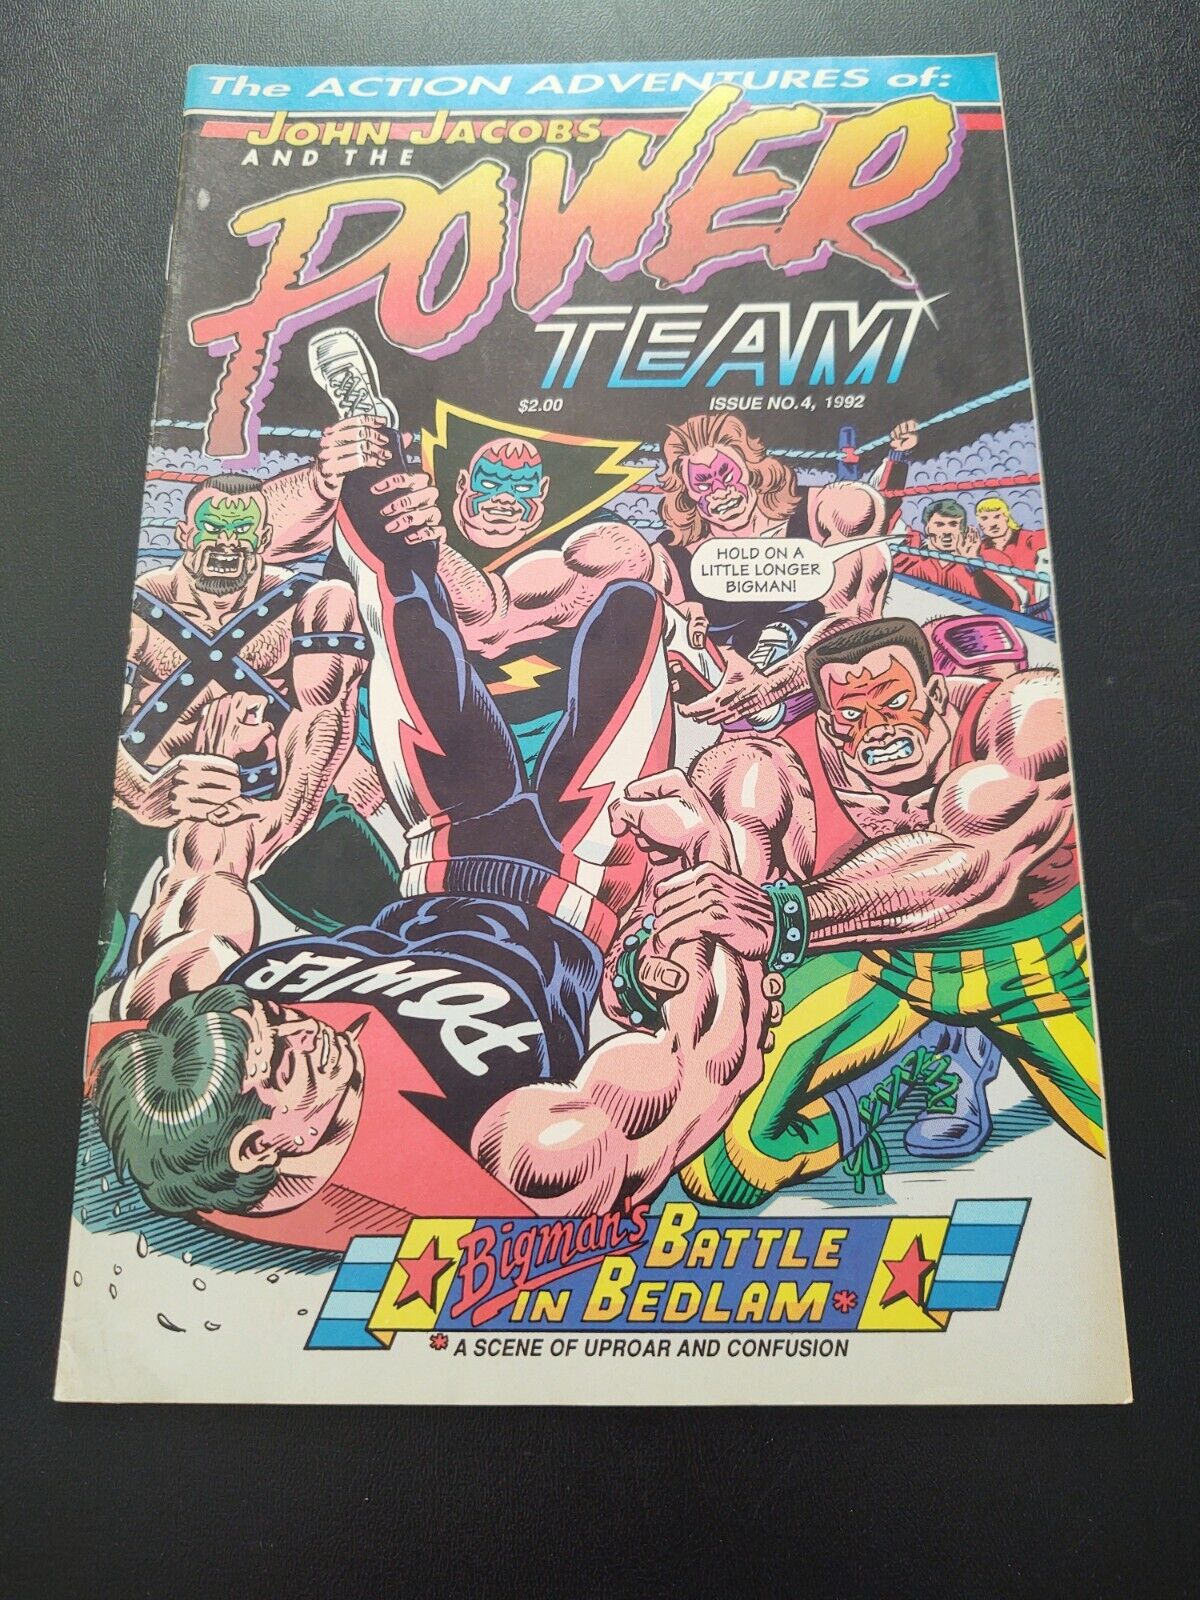 John Jacobs and the Power Team Issue #4 autographed 1992 weird evangelical comic